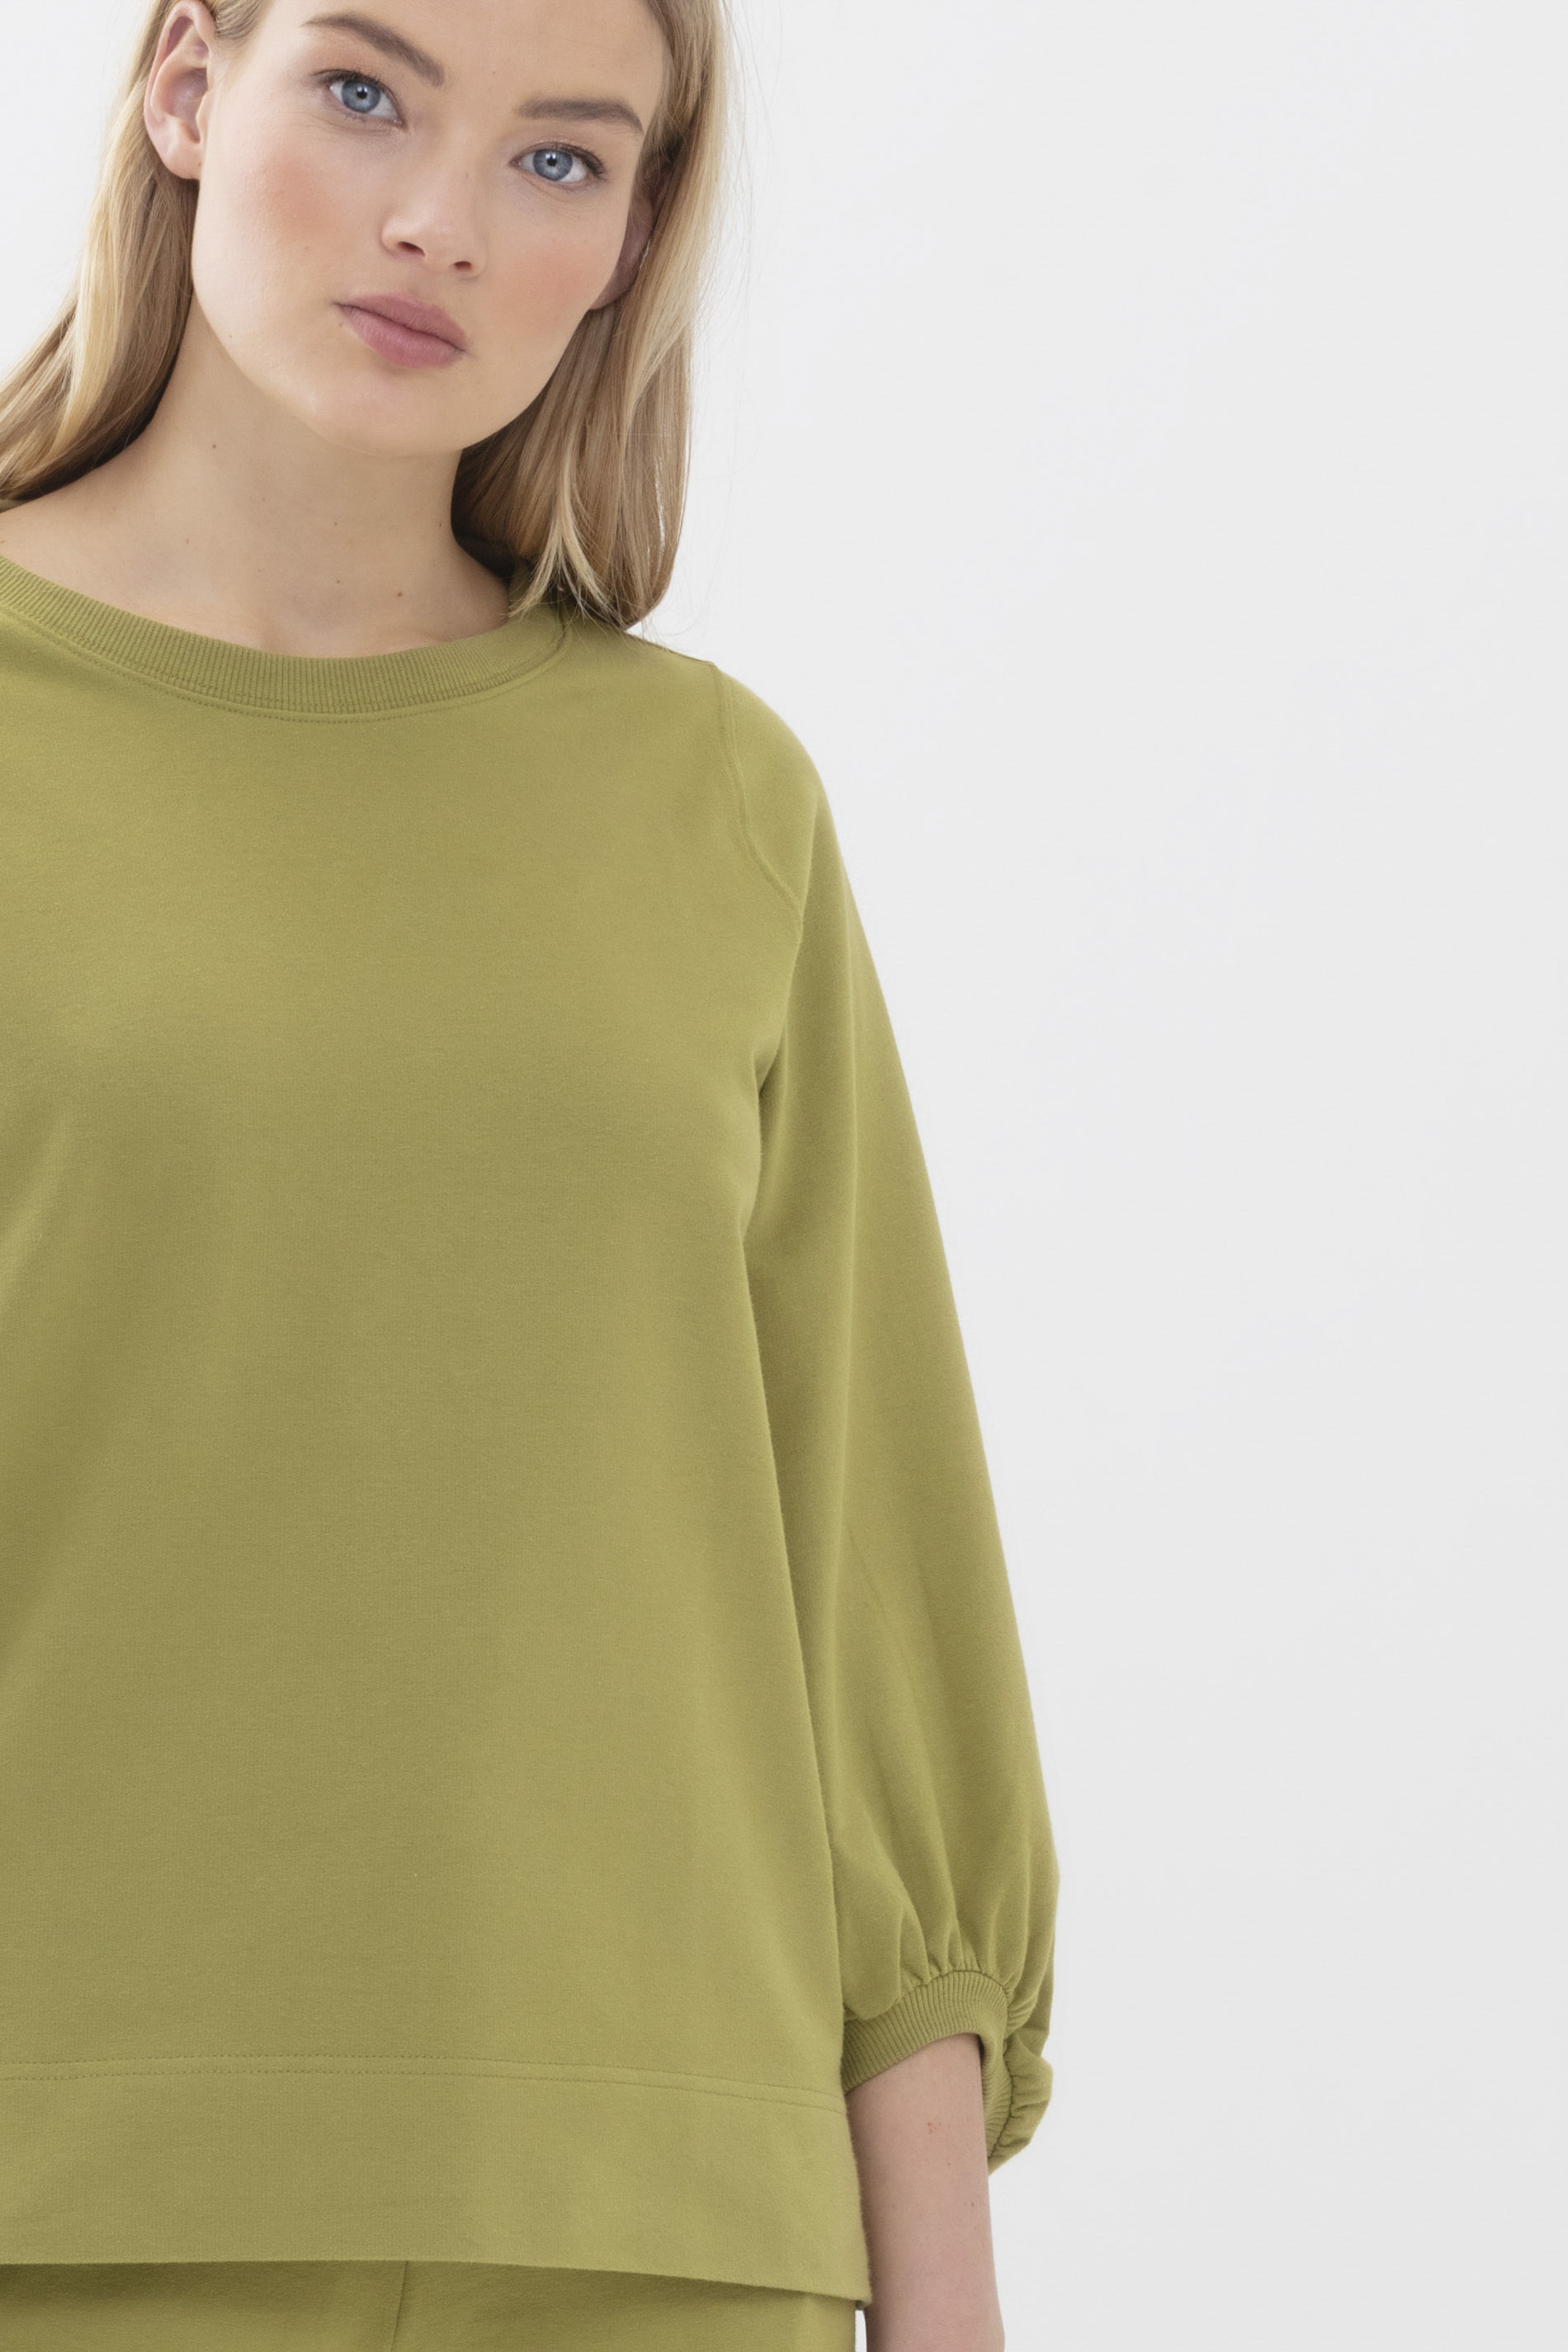 Sweater Tuscan Green Serie Mischa Detail View 01 | mey®